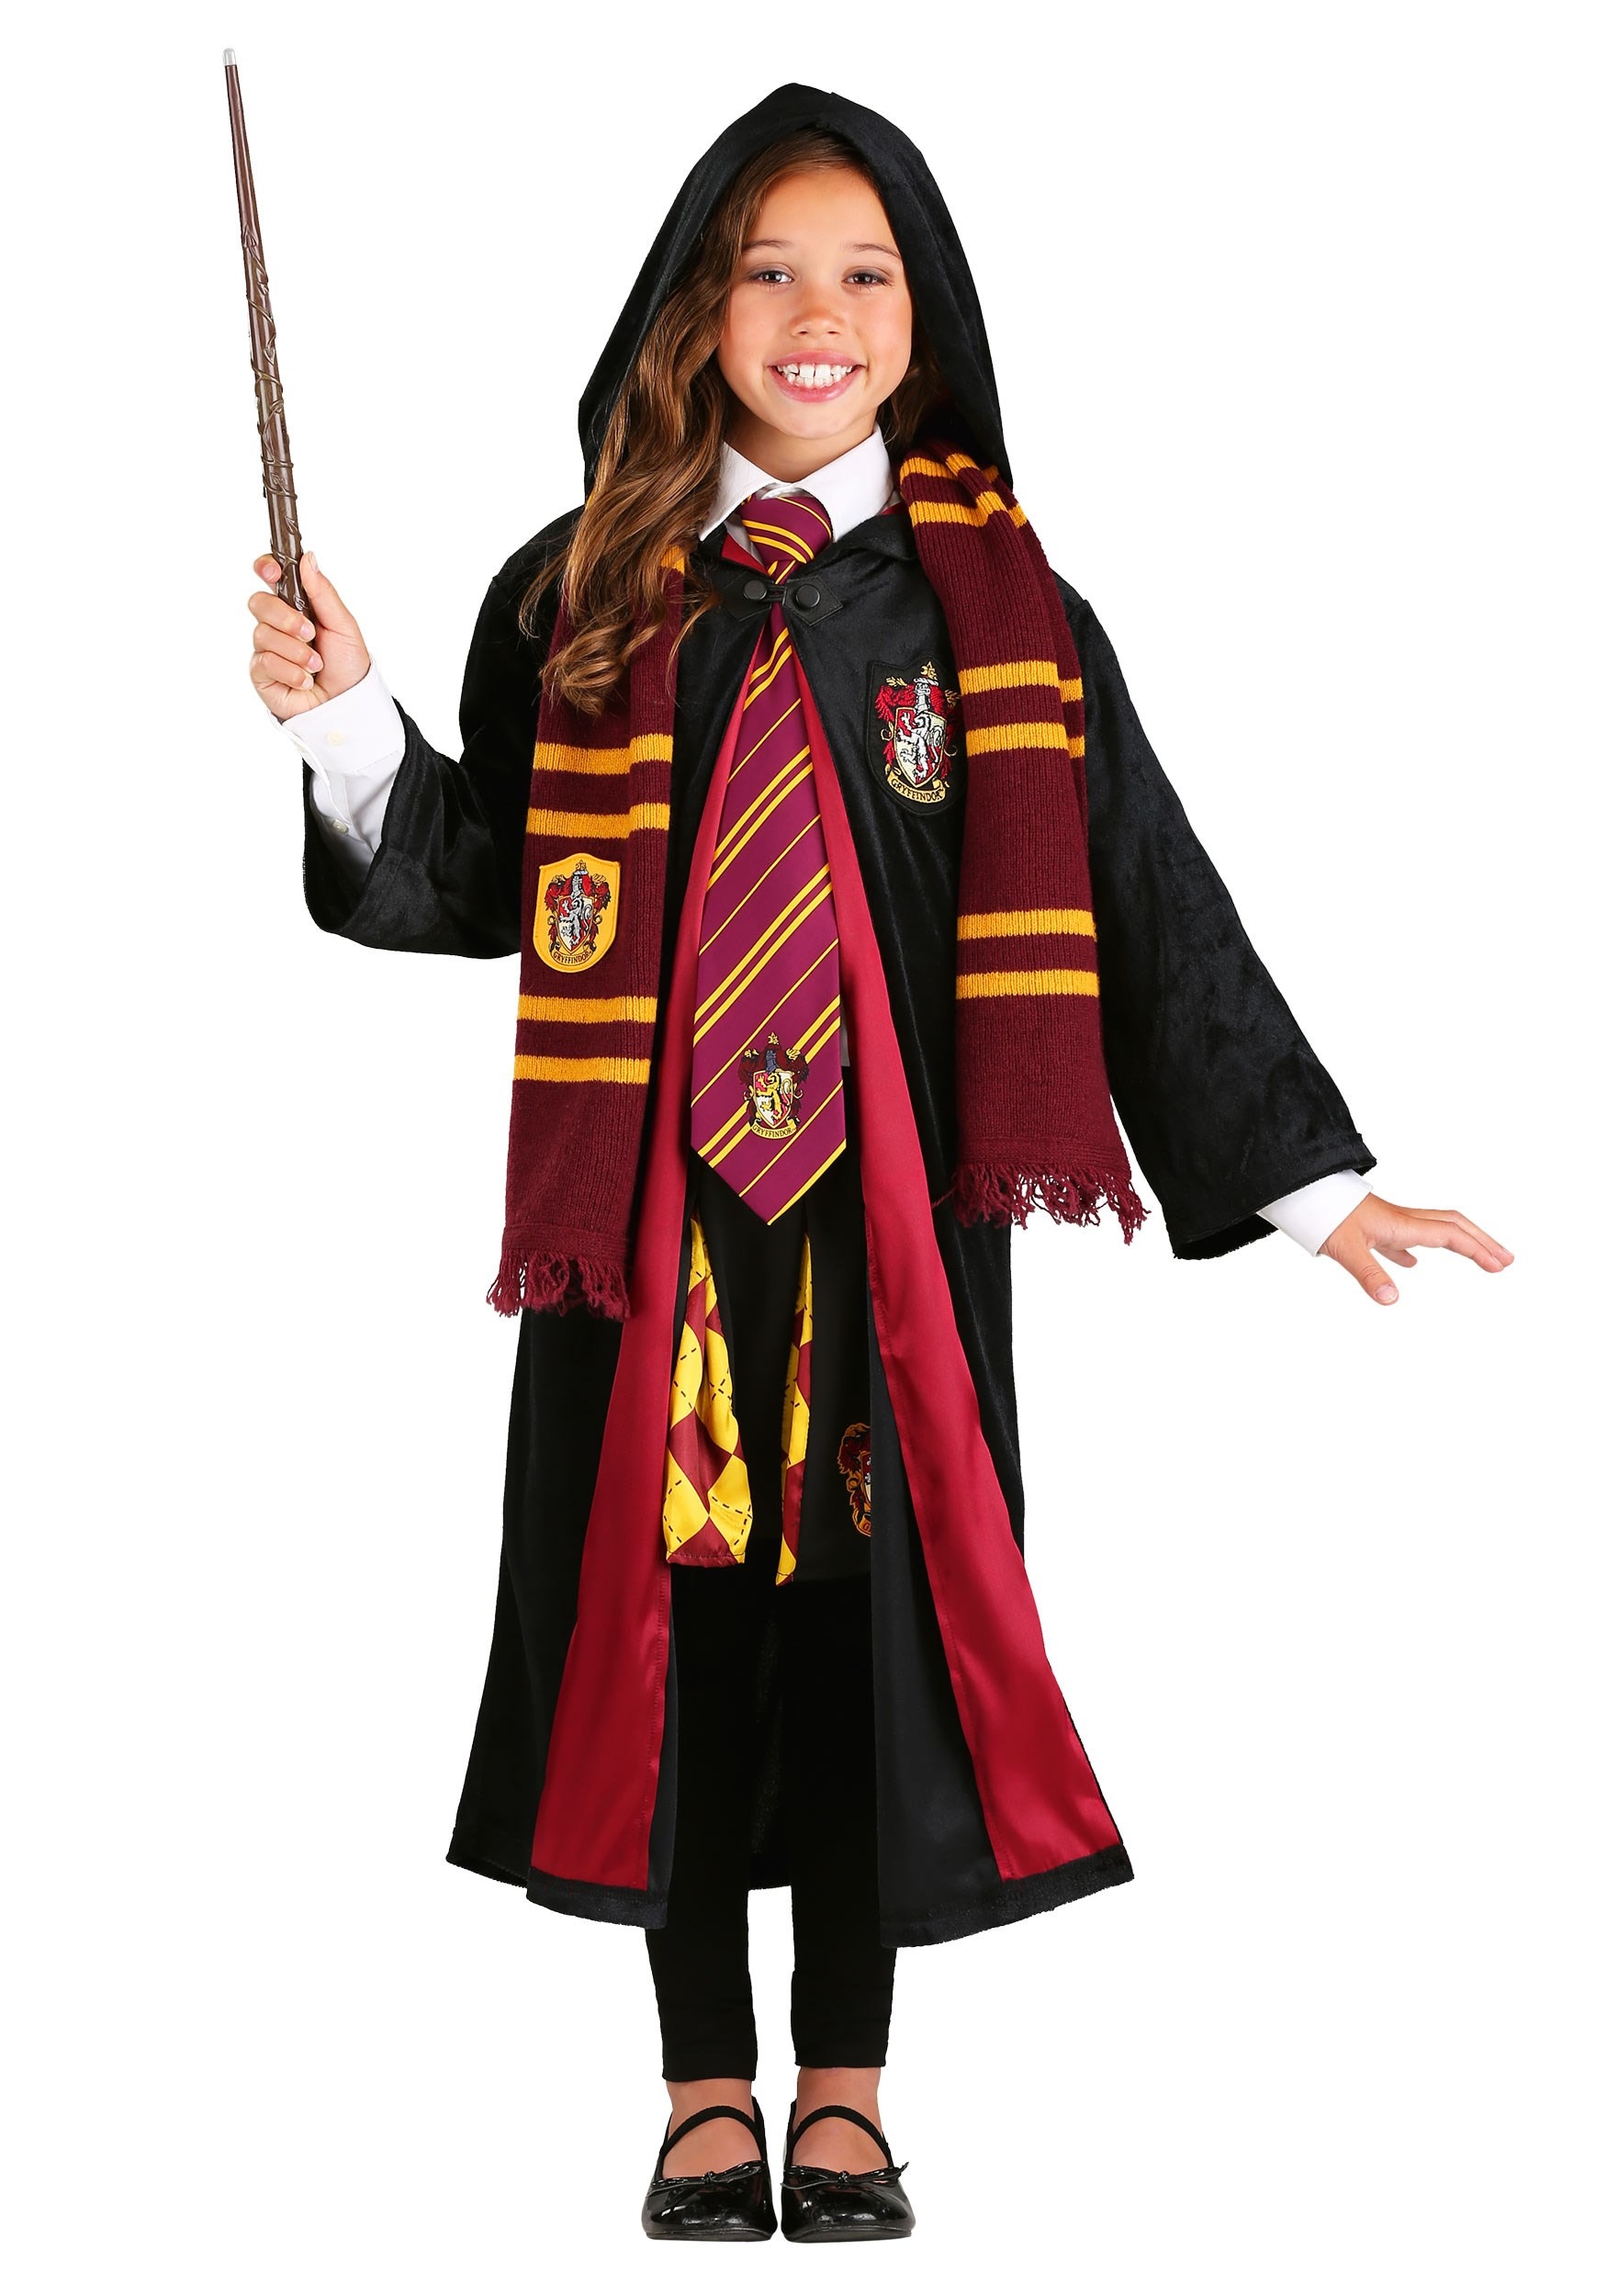 Harry Potter Gryffindor Robe Costume for Kids, Black and Red Satin Robe